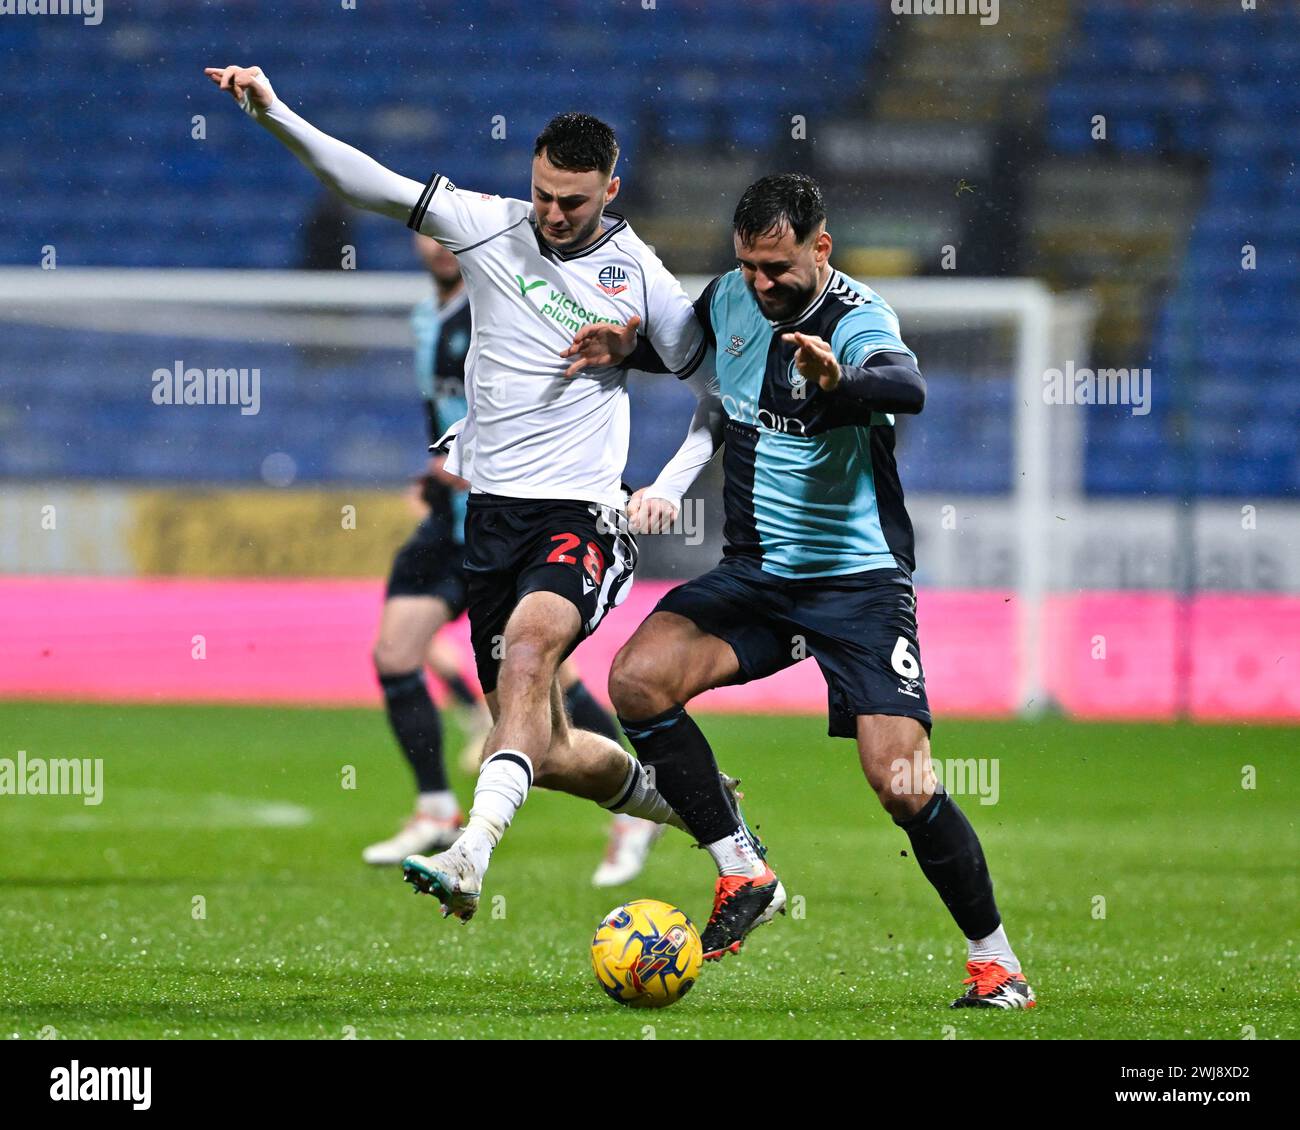 Ryan Tafazolli of Wycombe Wanderers and Aaron Collins of Bolton Wanderers battle for the ball, during the Sky Bet League 1 match Bolton Wanderers vs Wycombe Wanderers at Toughsheet Community Stadium, Bolton, United Kingdom, 13th February 2024  (Photo by Cody Froggatt/News Images) Stock Photo